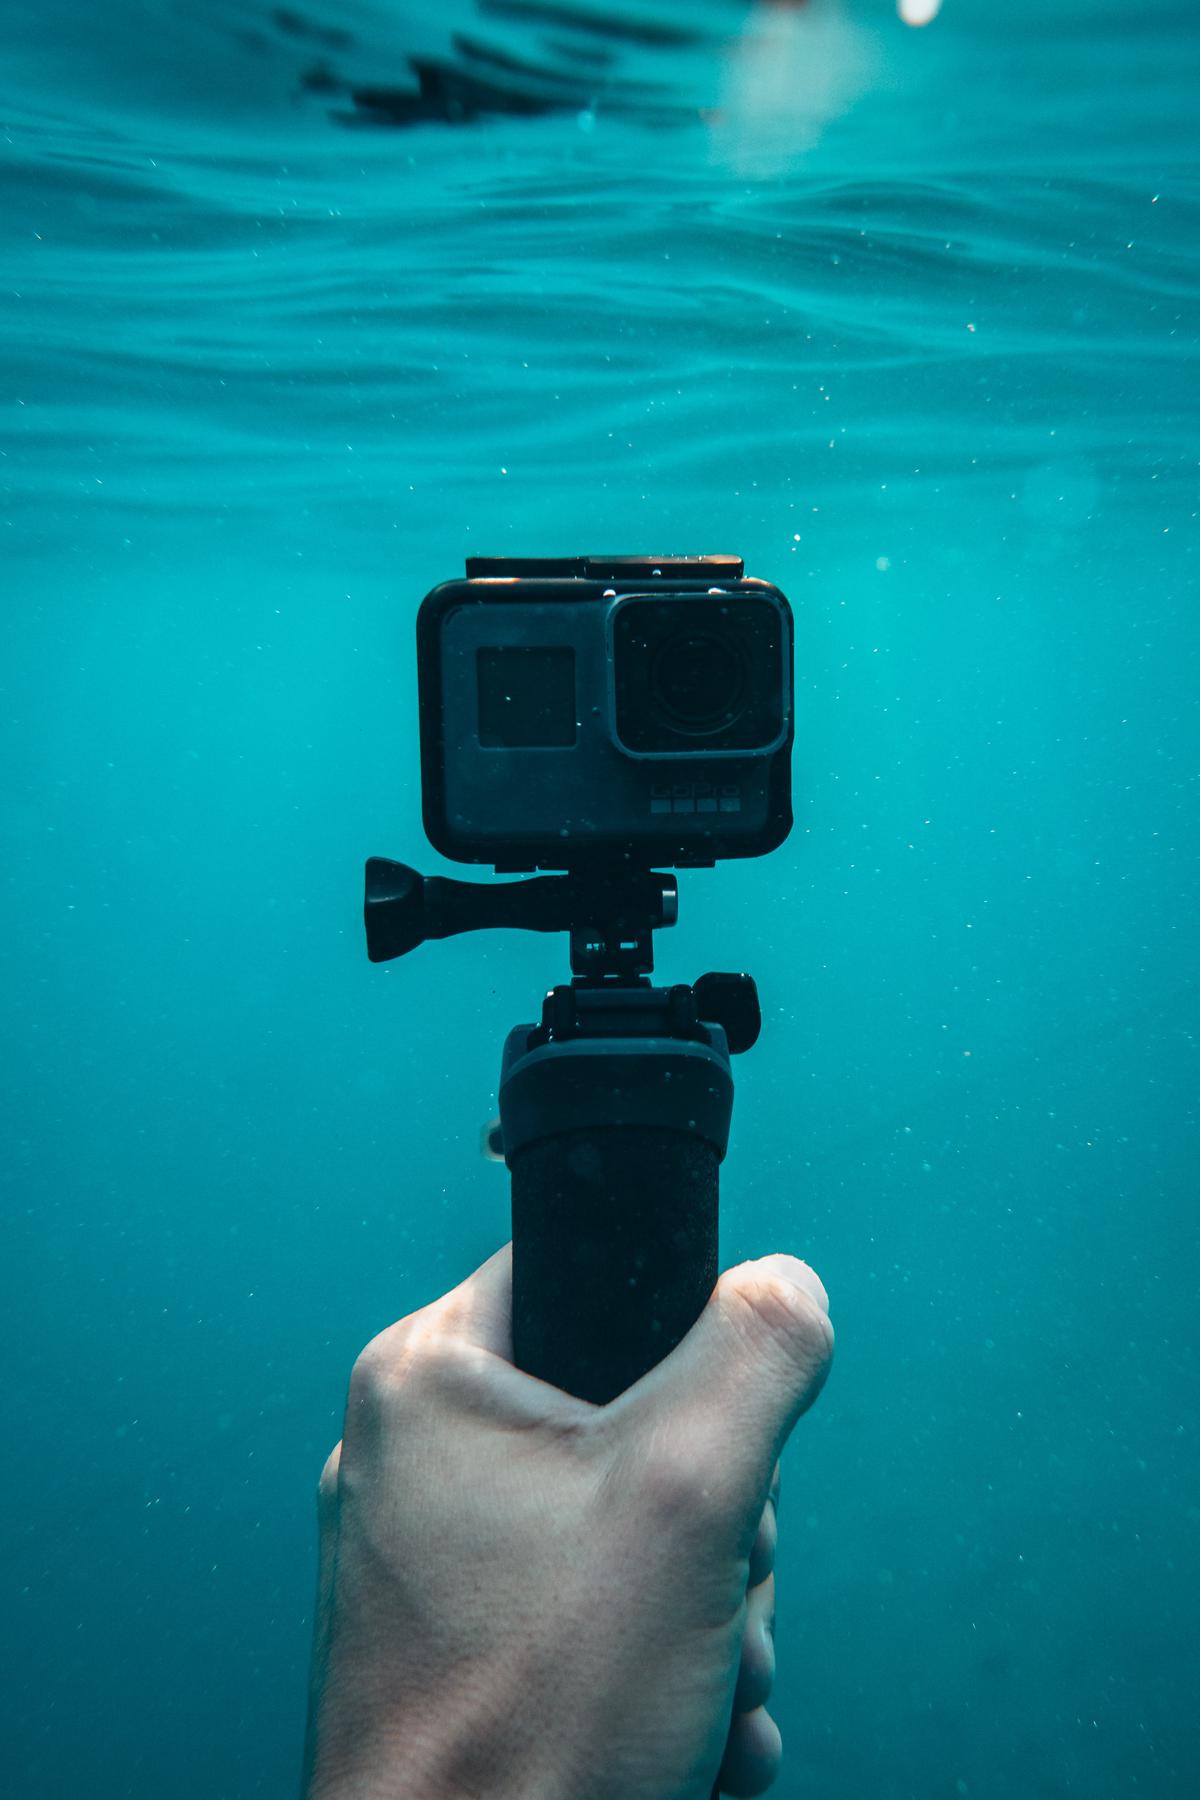 An image depicting various underwater photography equipment such as waterproof cameras, underwater housings, lenses, lighting equipment, and other accessories.